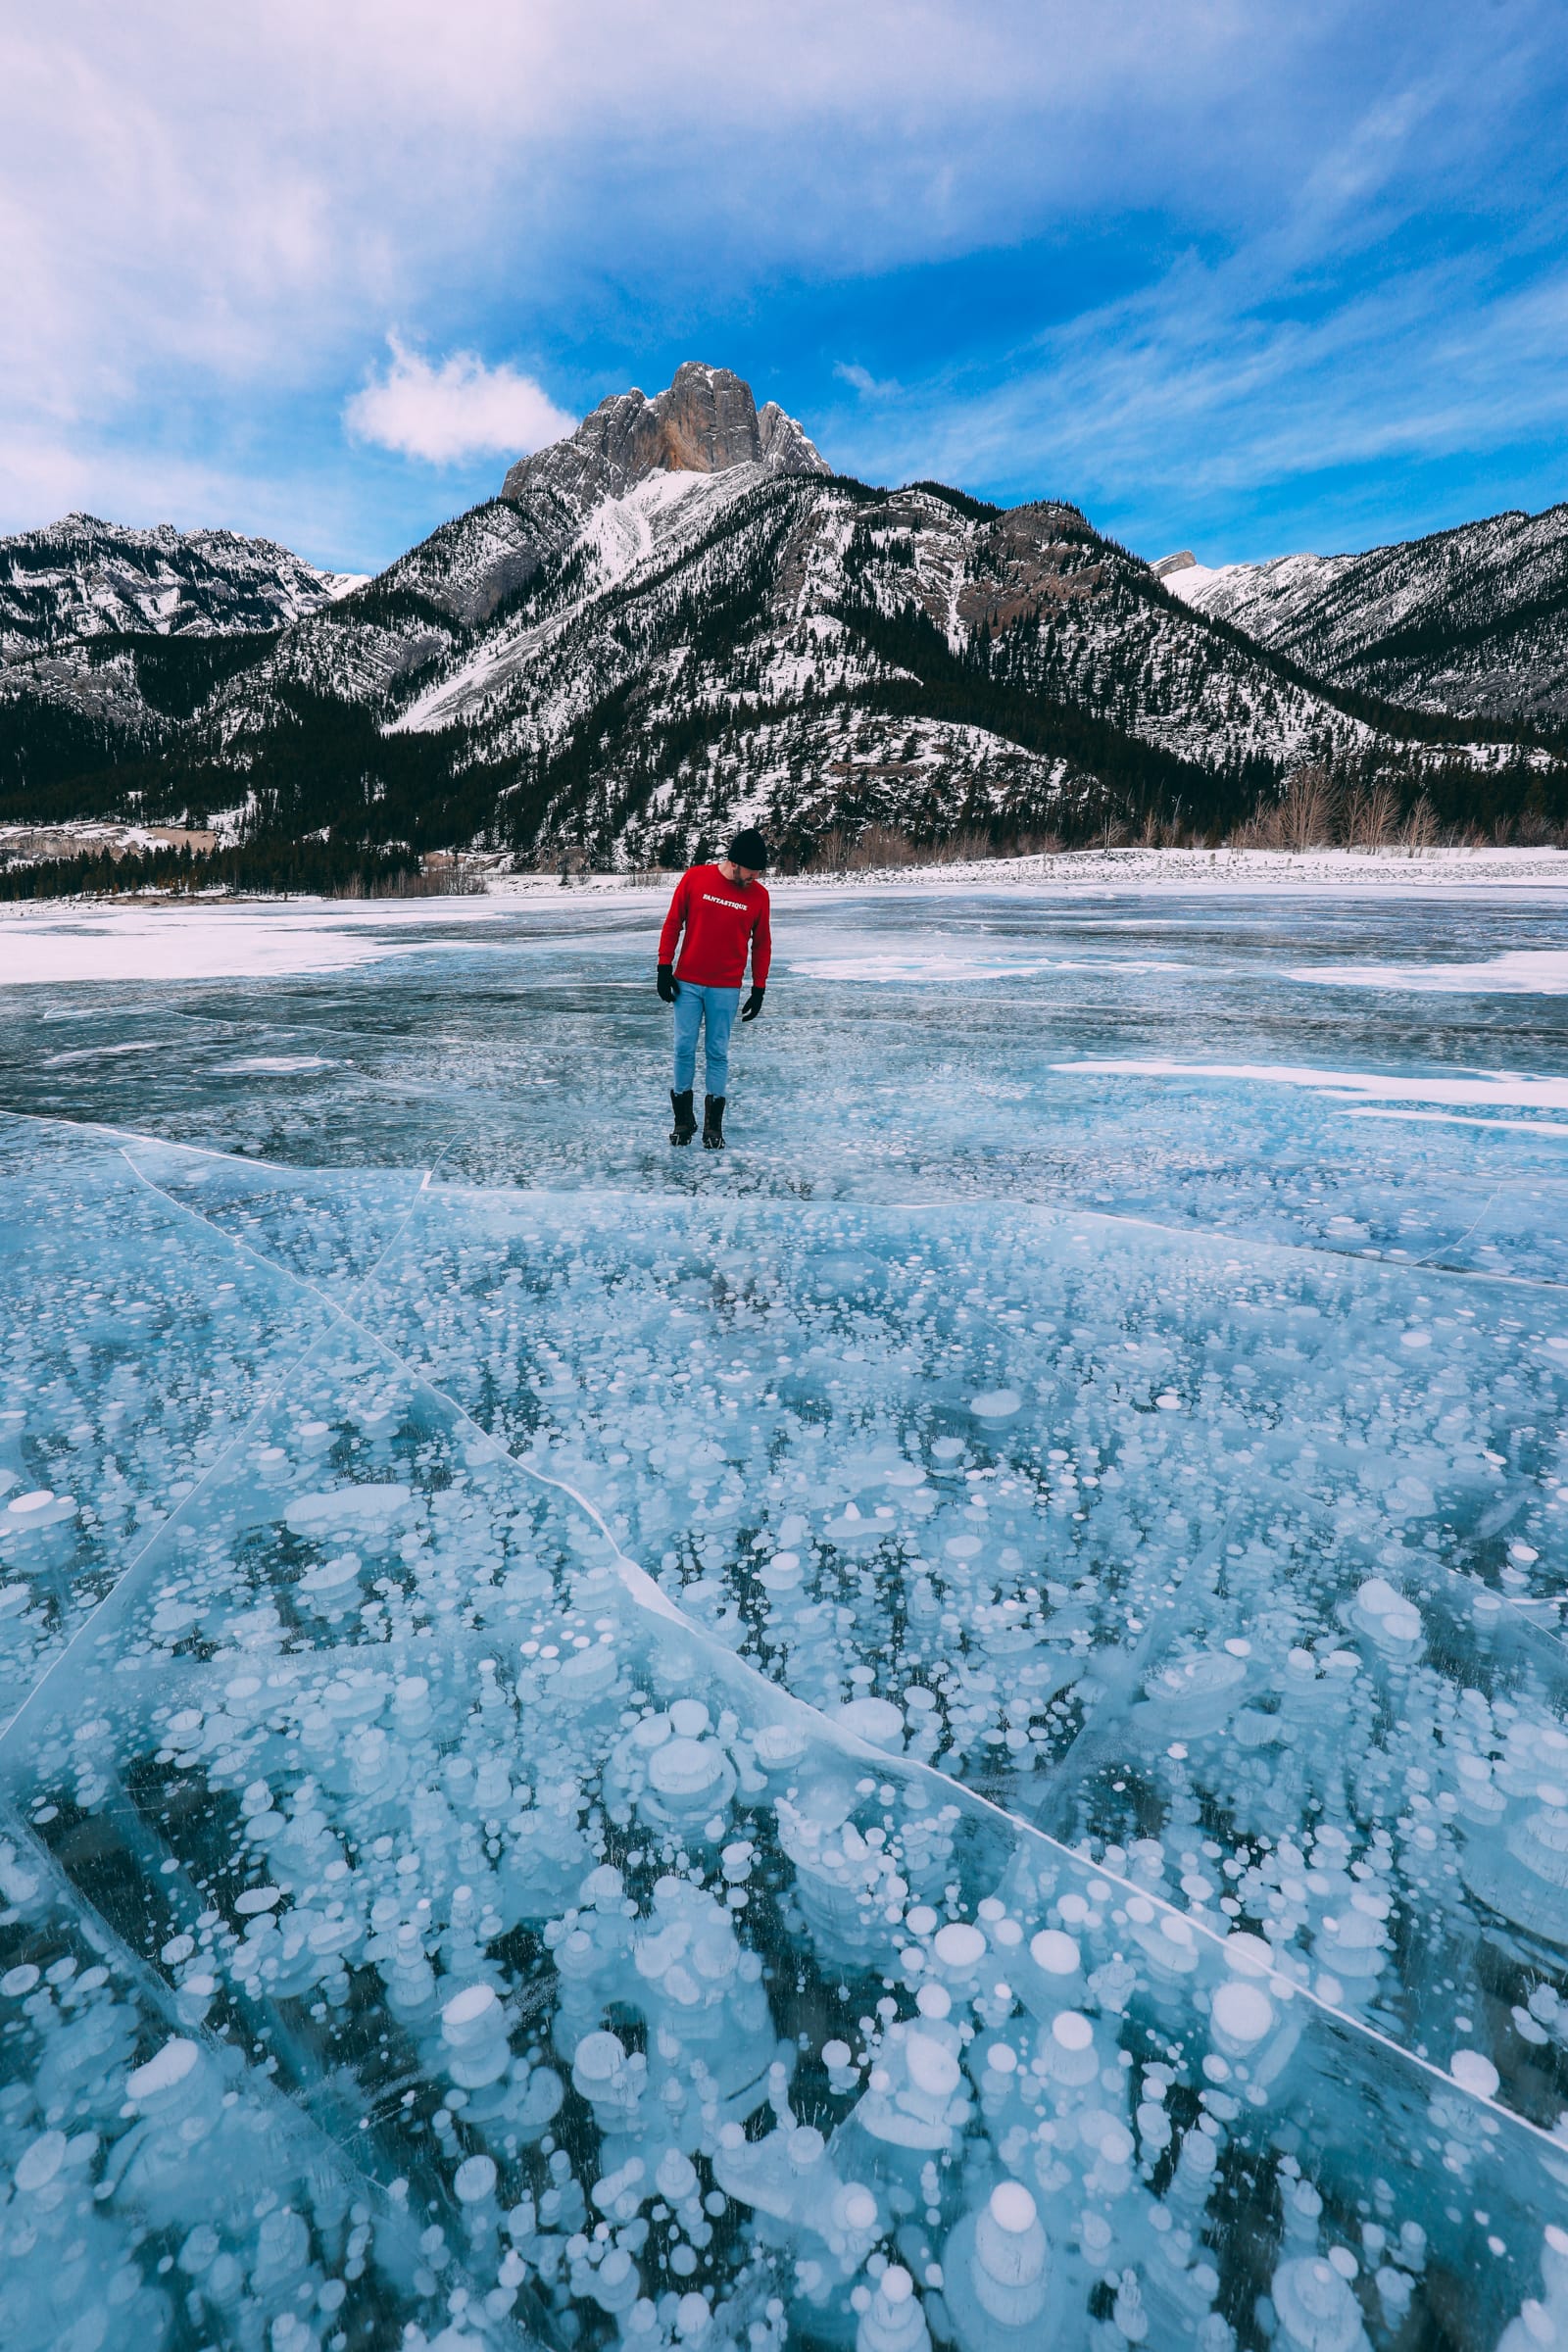 Driving Canada's Epic Icefields Parkway And Finding The Frozen Bubbles Of Abraham Lake (39)